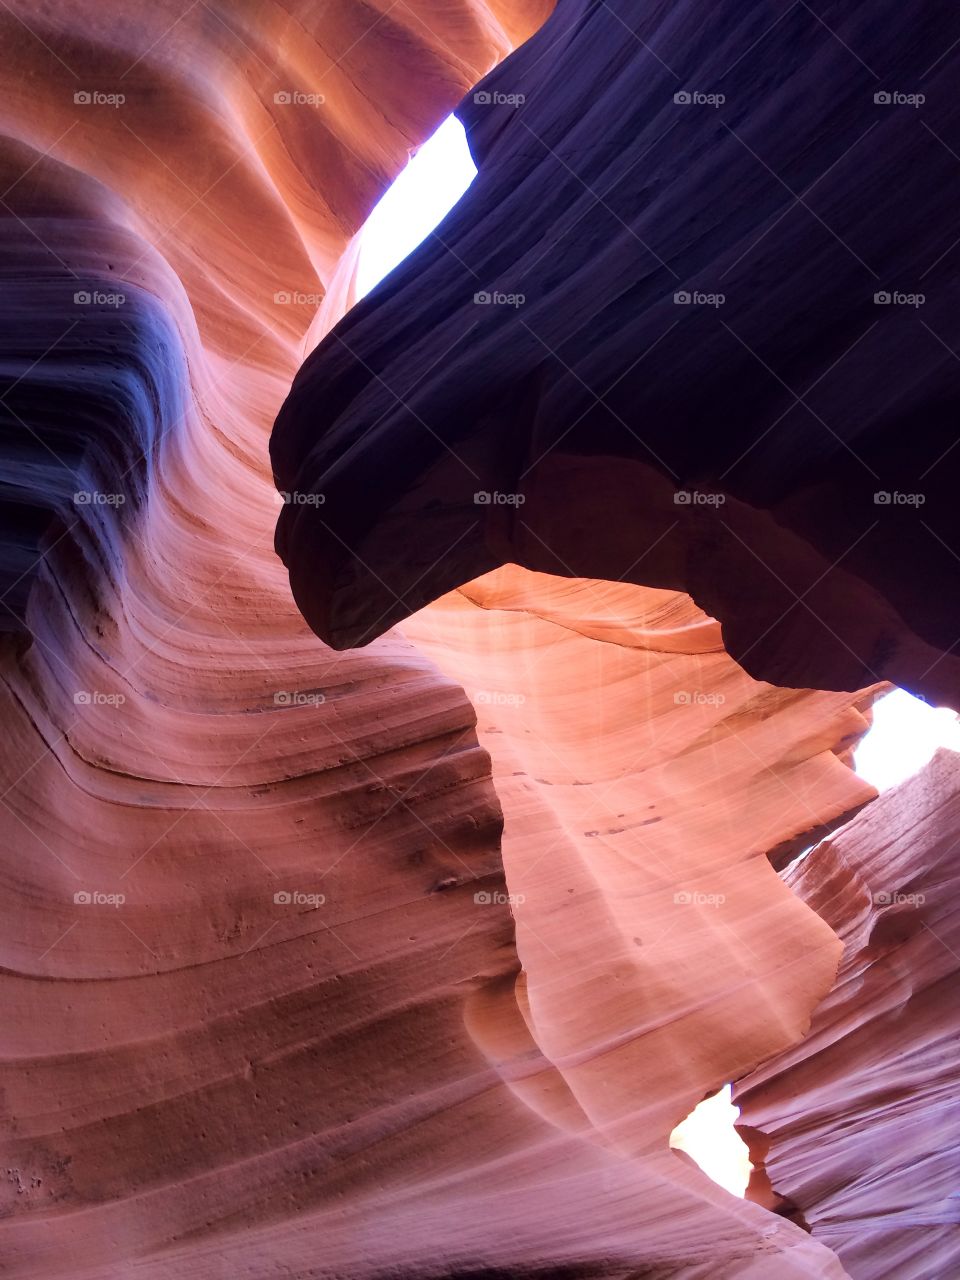 Lion's head in Antelope Canyon